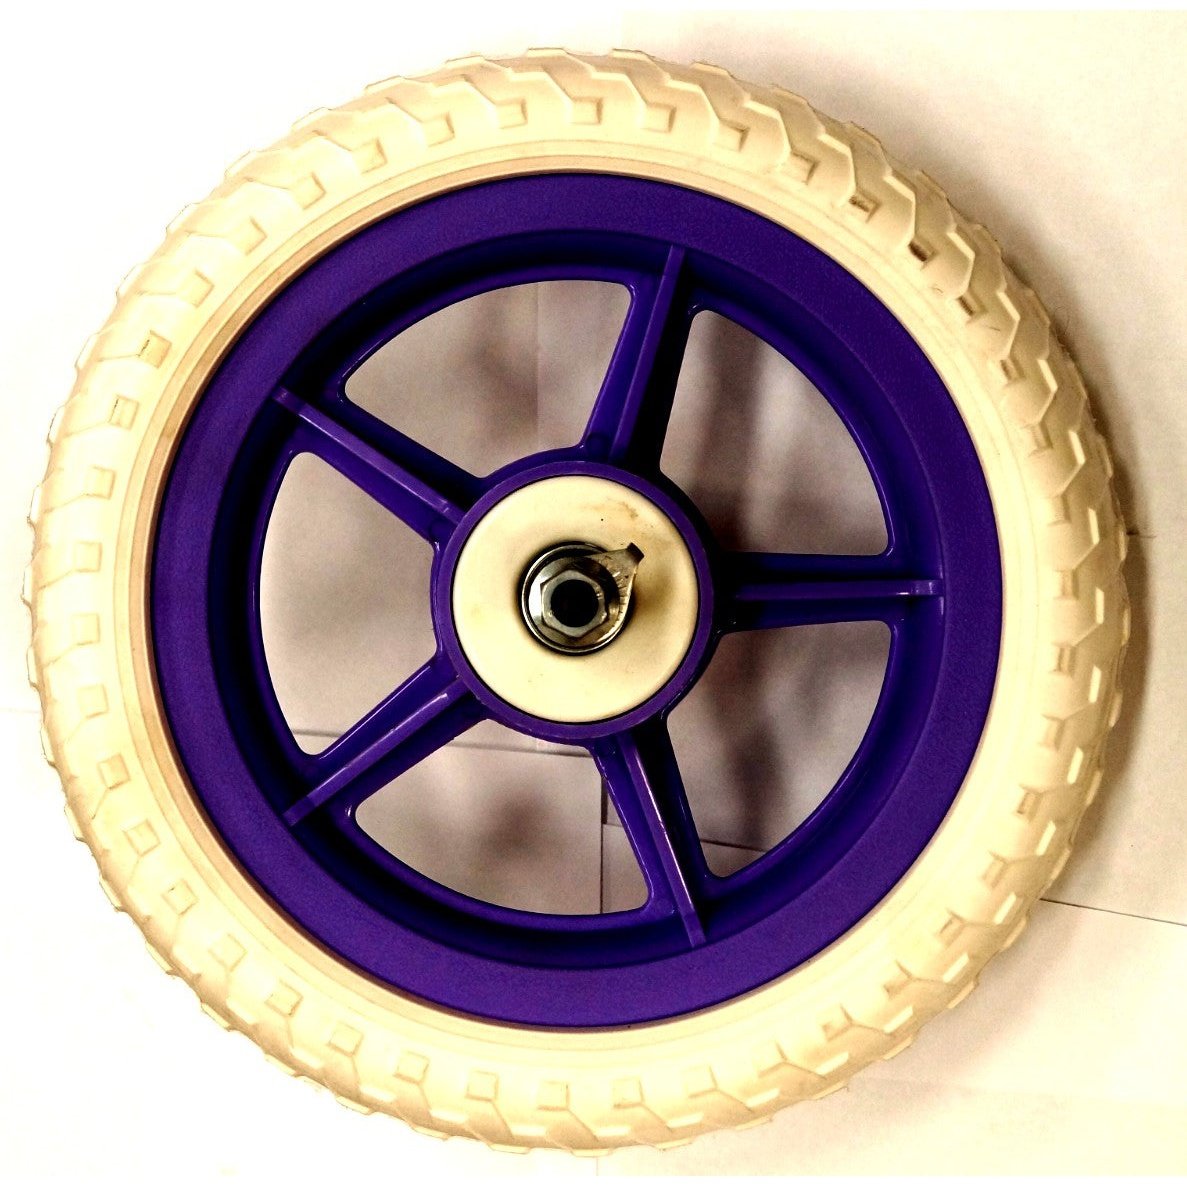 VeeRubber Scooter Wheel Mauve for Smooth Rides - White Tyre Included